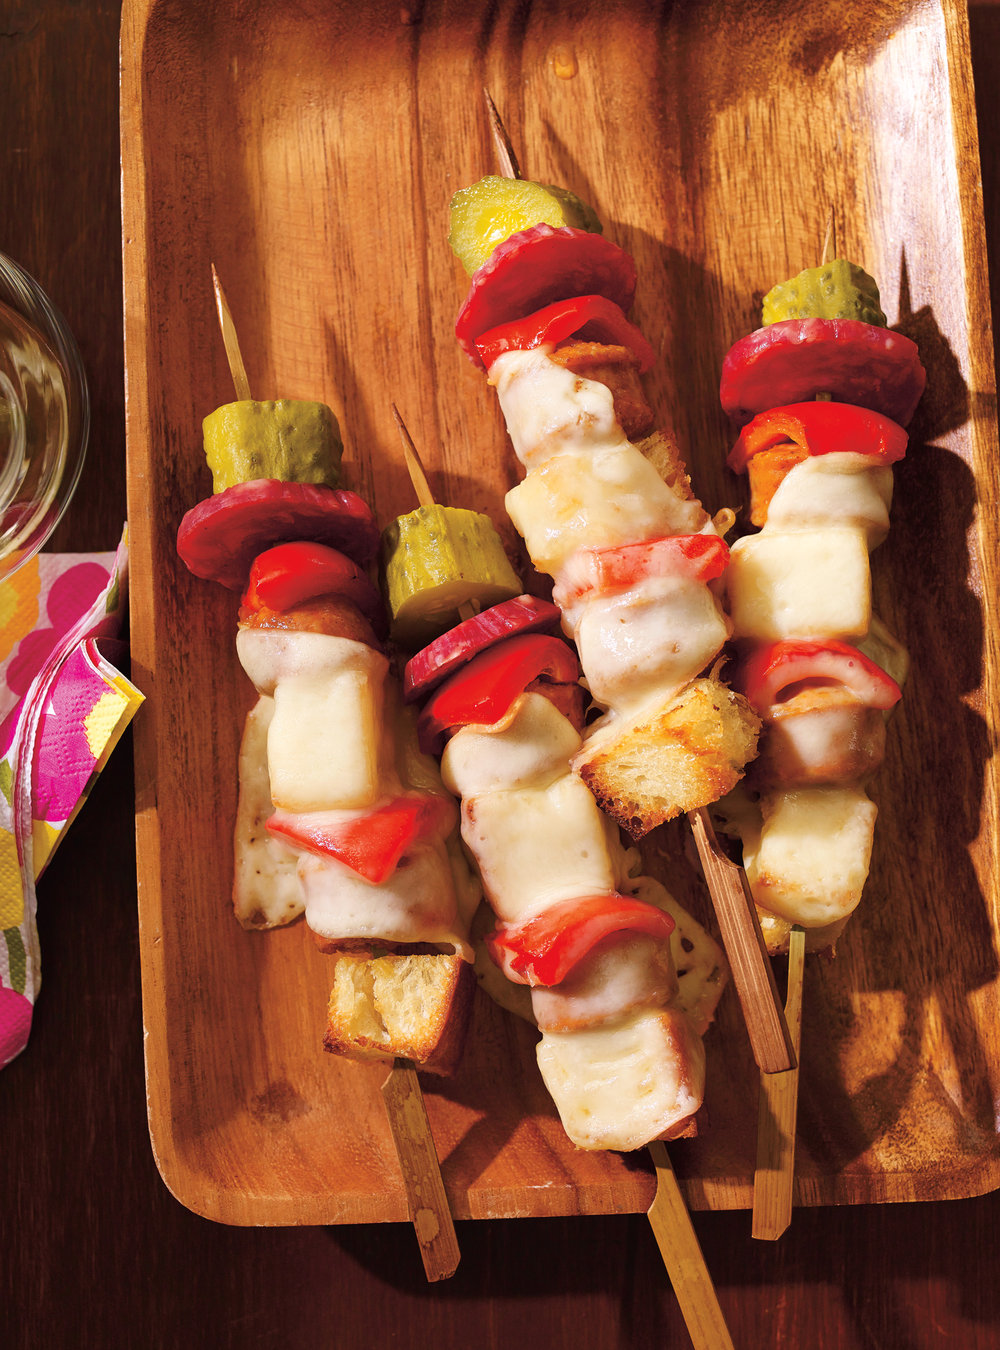 Raclette-Style Bread, Pickle and Dried Sausage Skewers